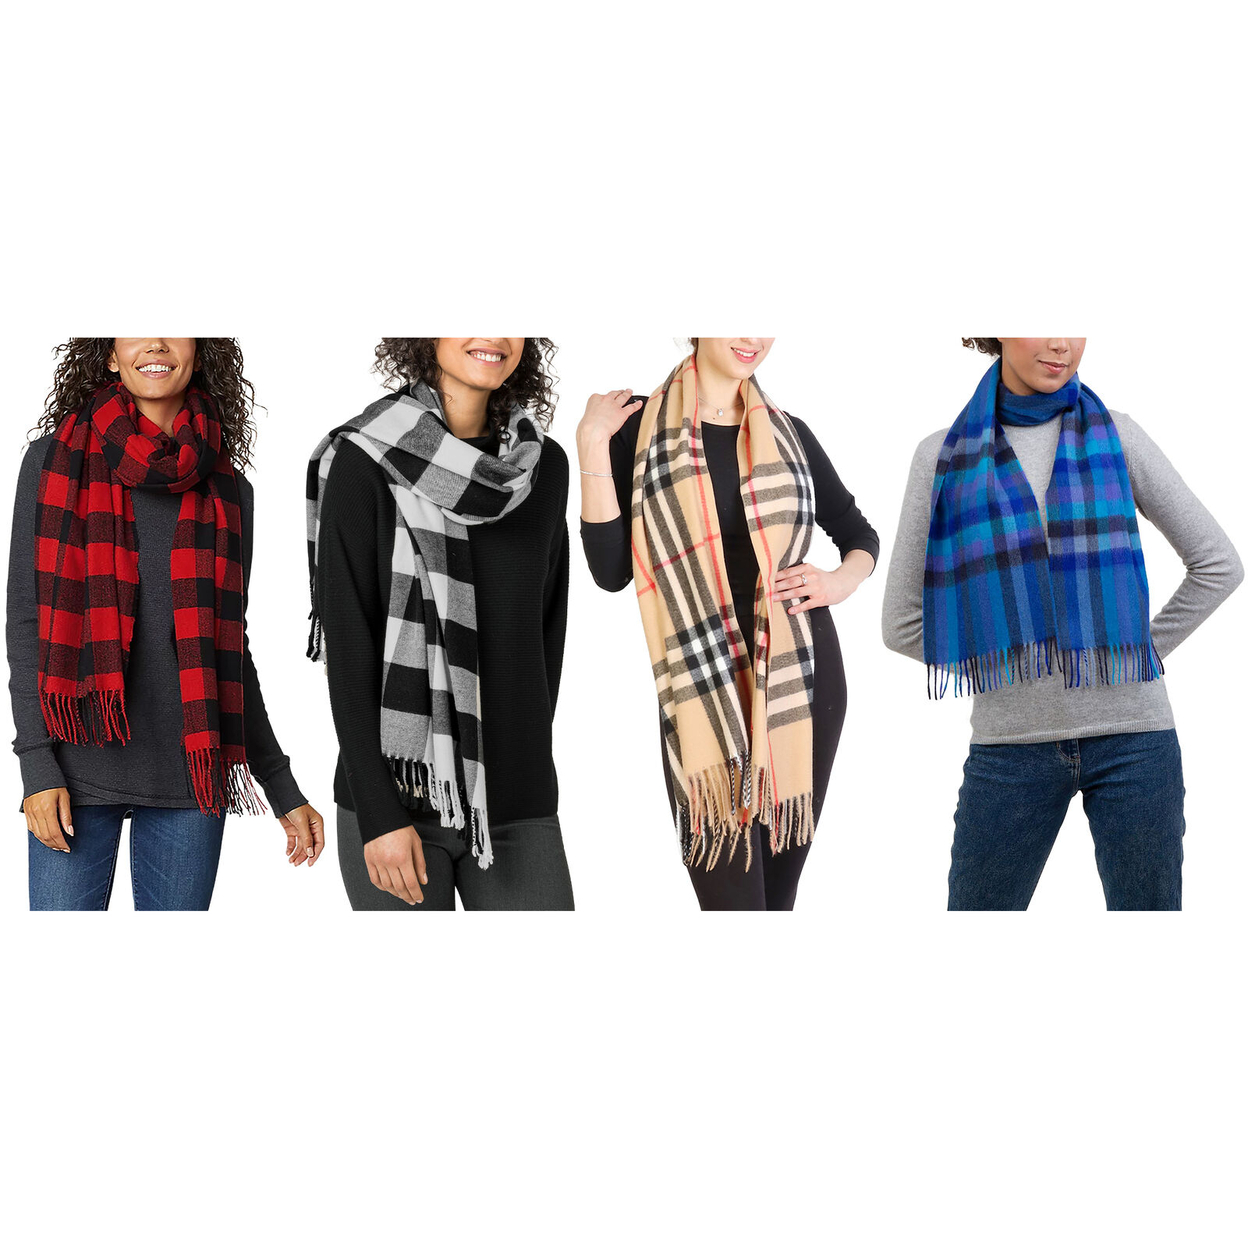 2-Pack: Women's Ultra Soft Plaid Cashmere Feel Winter Warm Scarfs - Black & Red